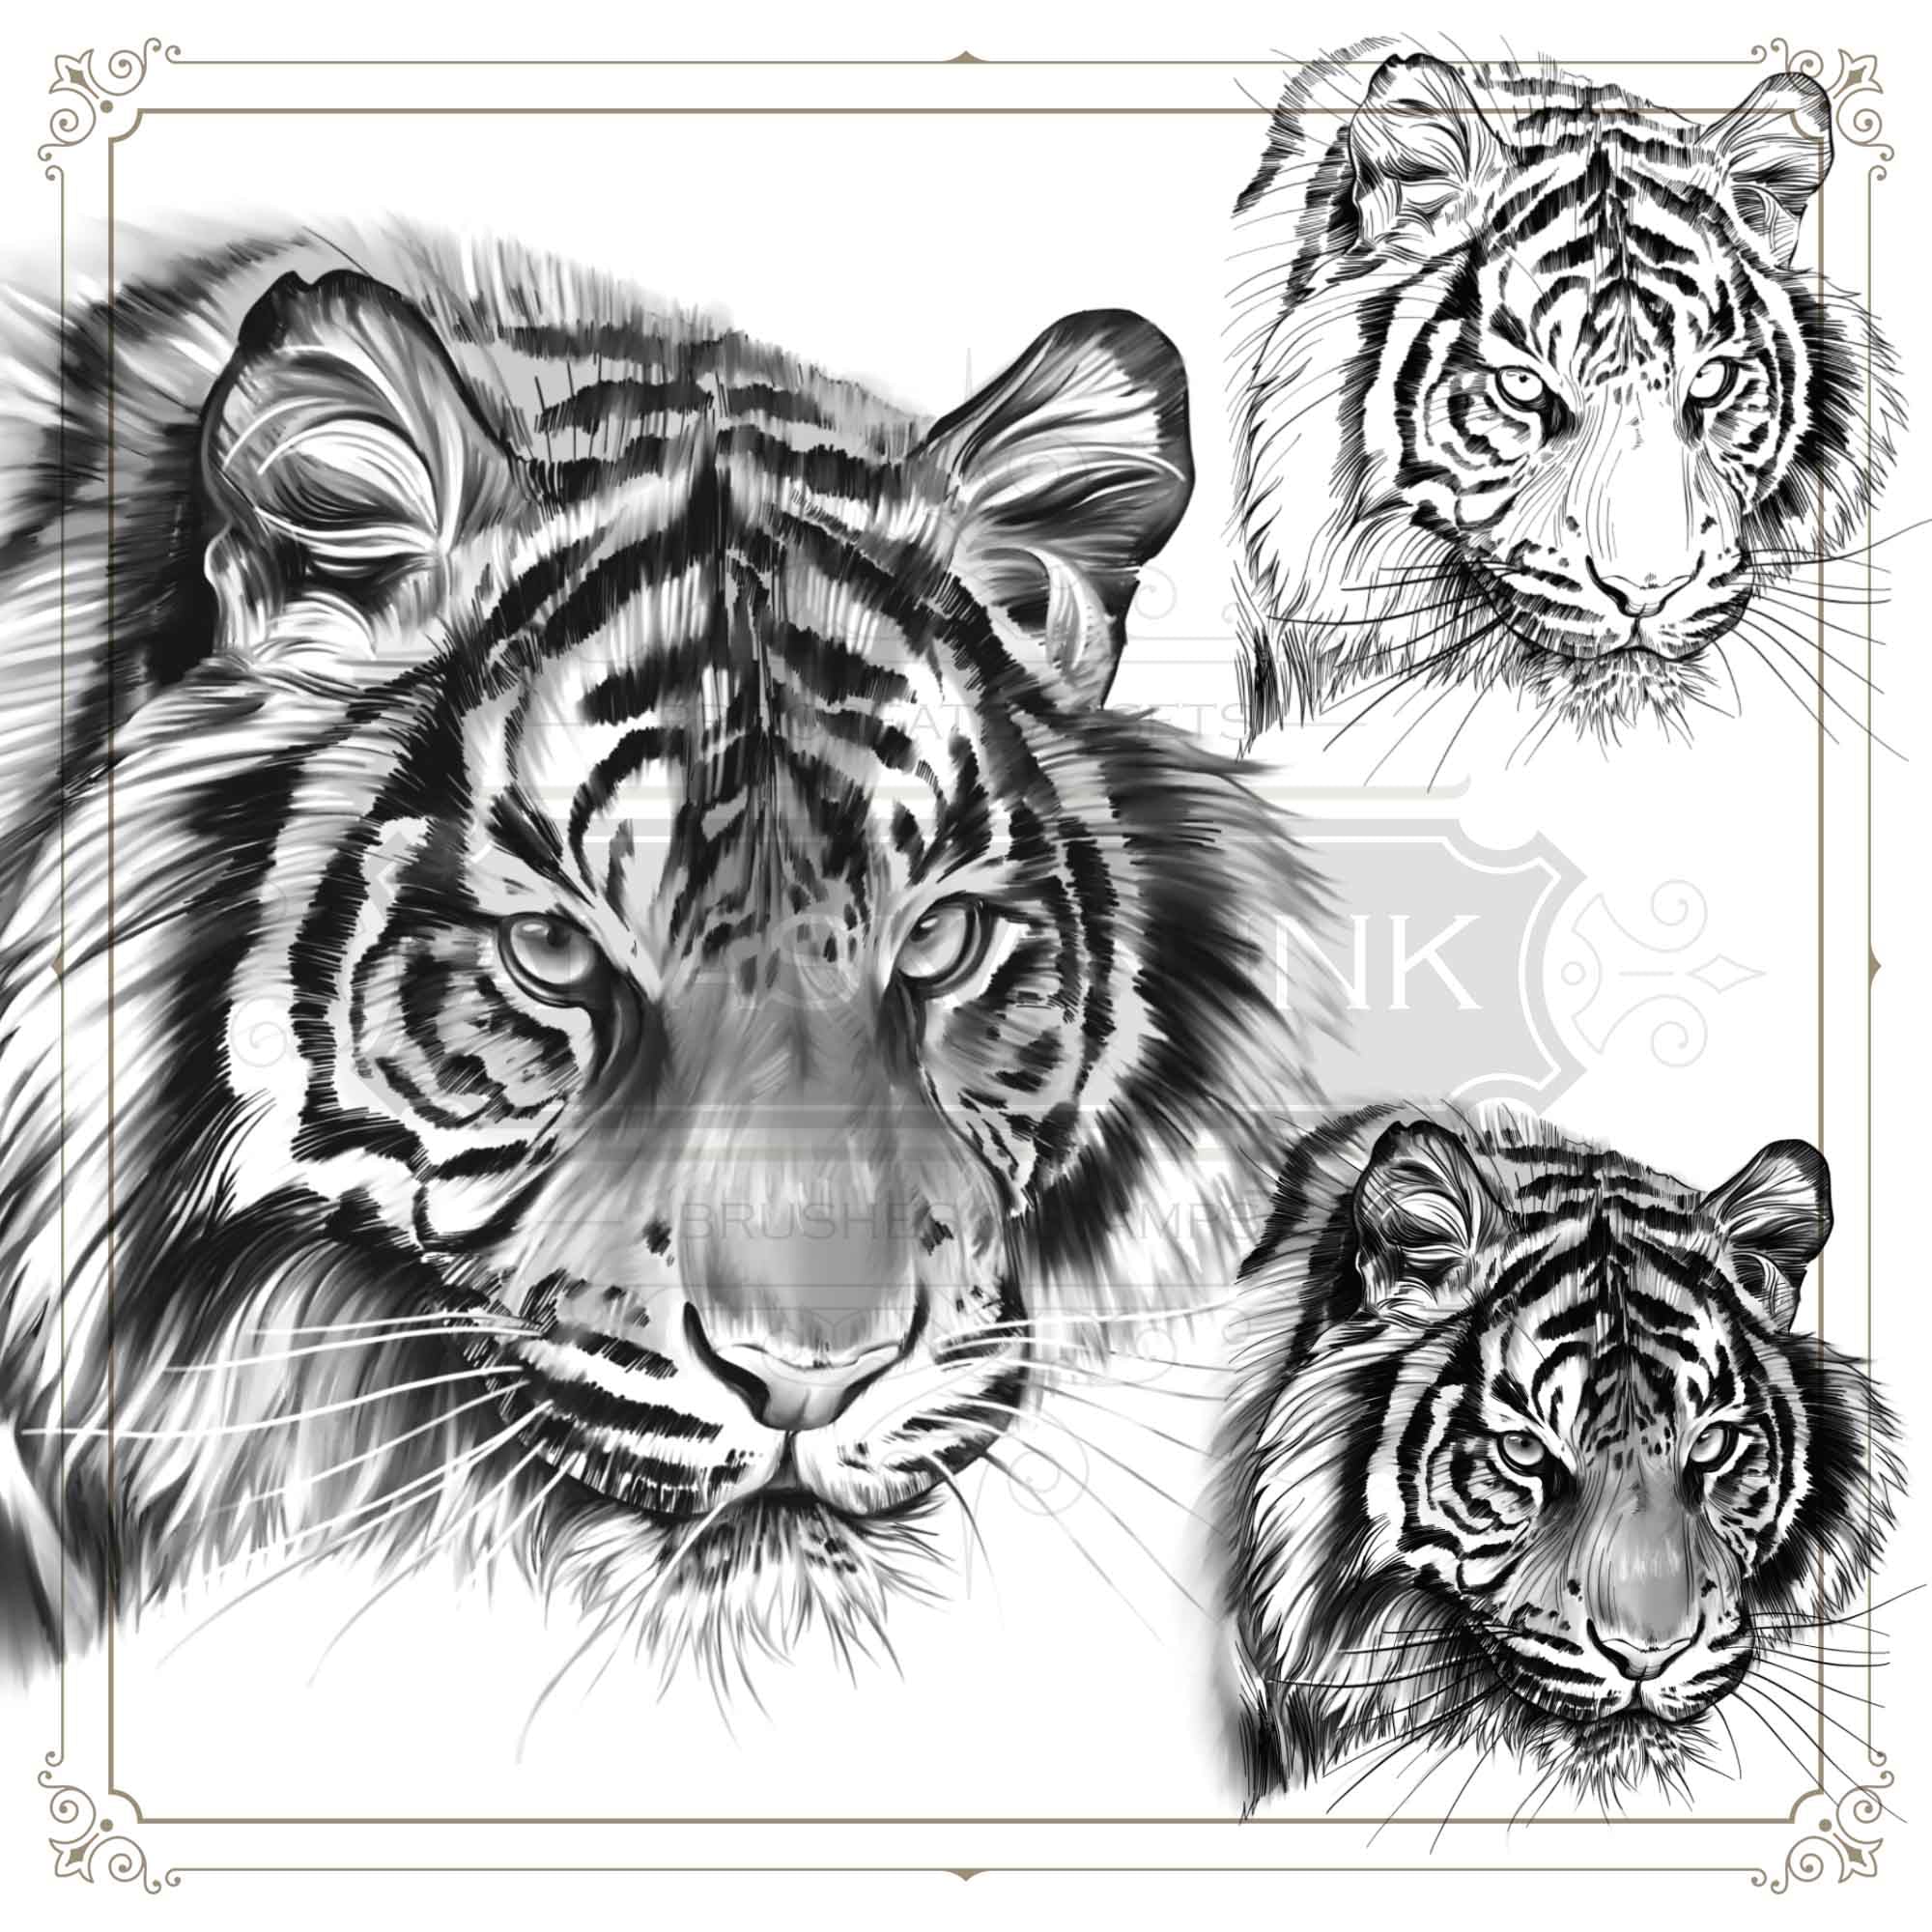 Buy Tiger Tattoo Design Detailed High Resolution Digital Art on White  Background Printable Tattoo Stencil Online in India - Etsy